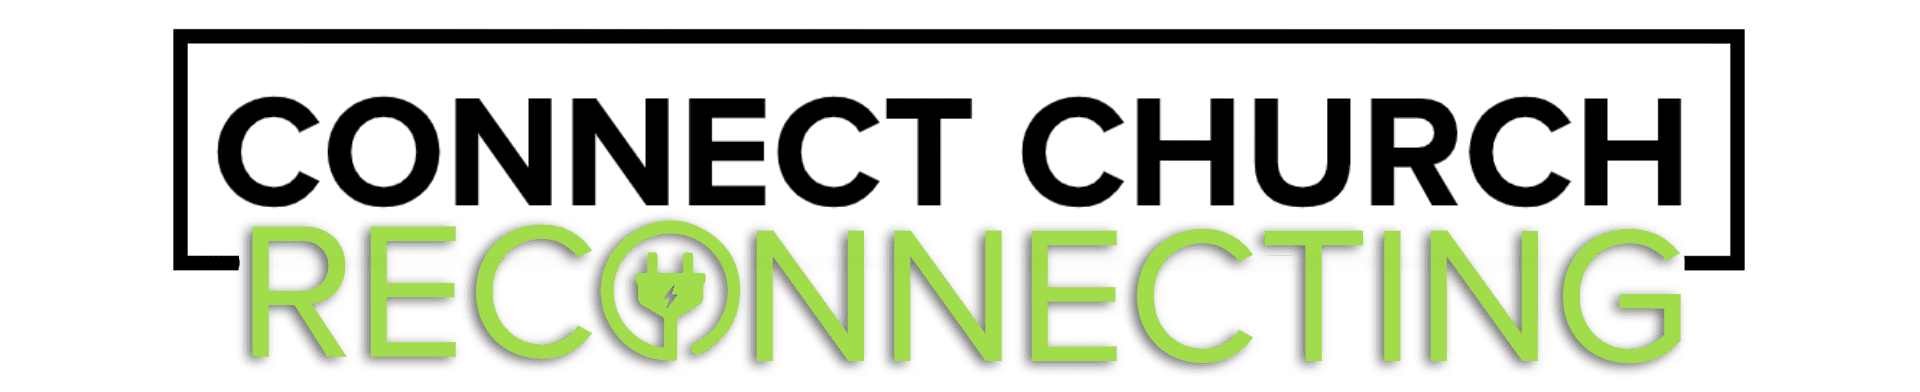 Reconnecting Logo - Green